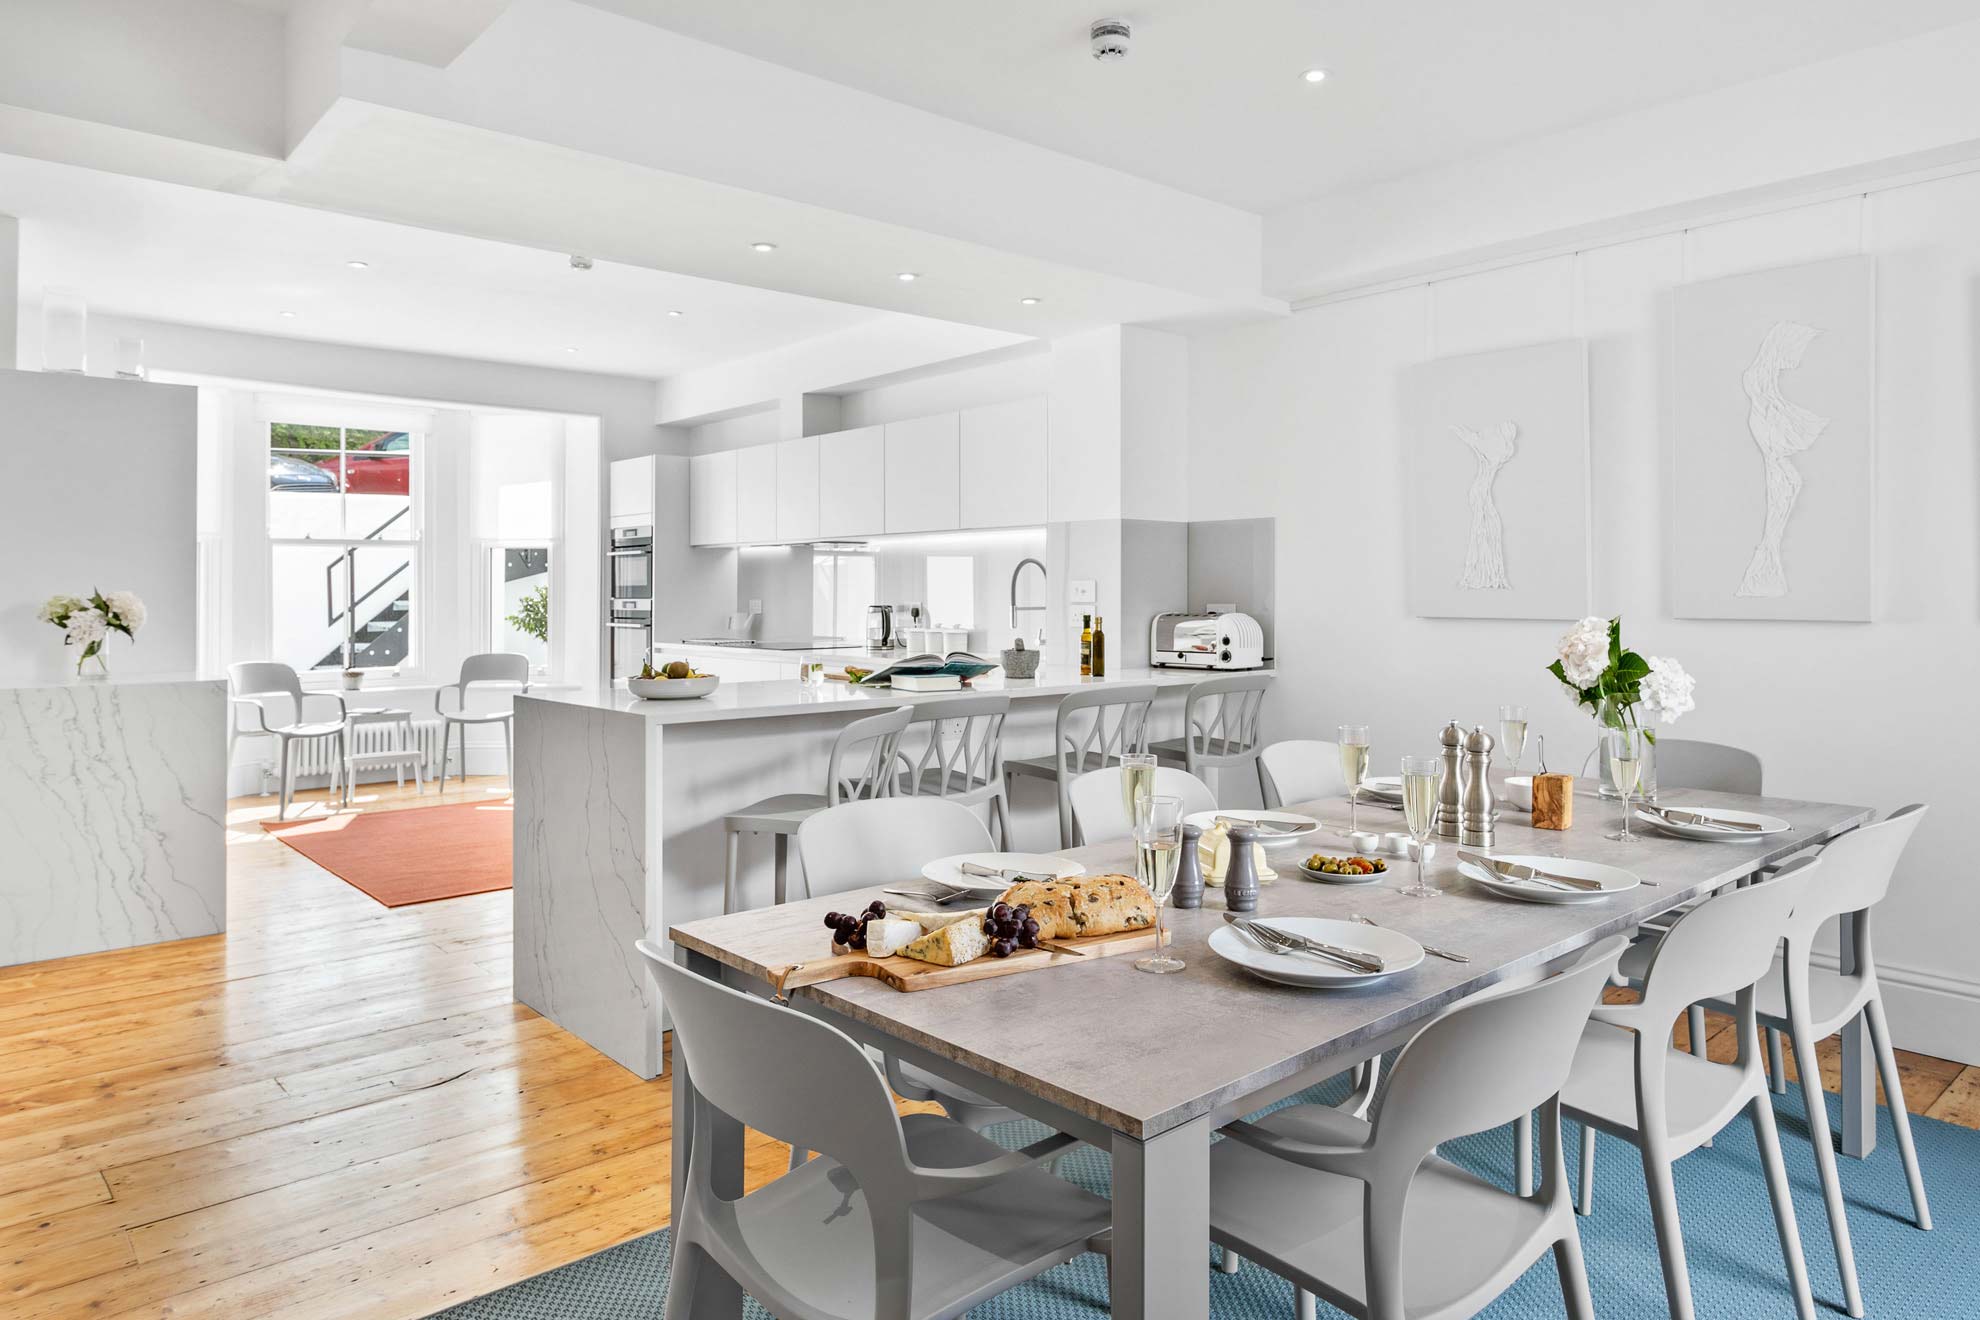 Spend time socialising in the gorgeous open-plan kitchen